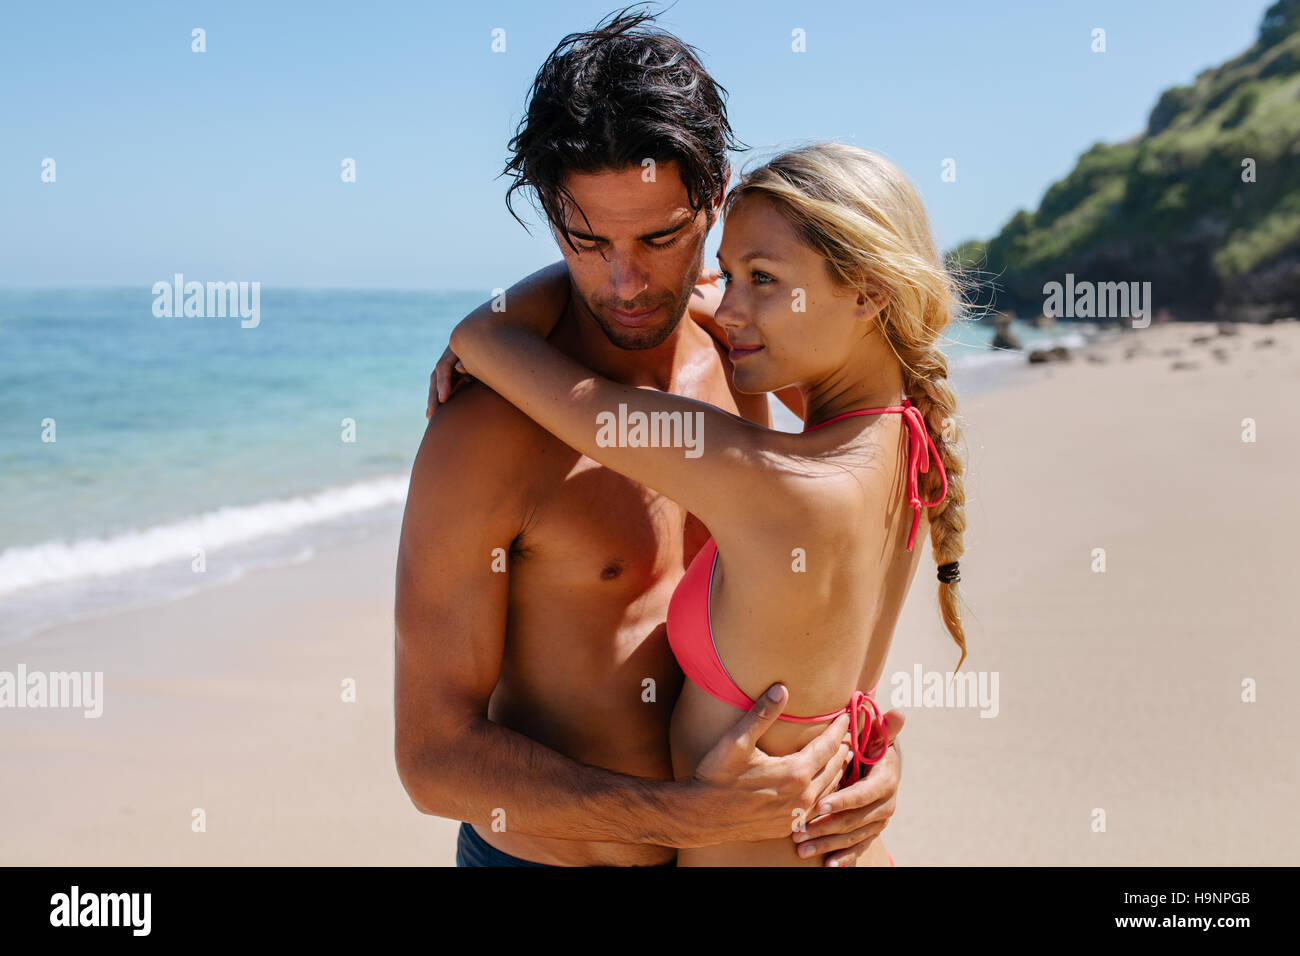 Portrait of romantic young couple embracing on the beach. Beautiful young woman in bikini with her boyfriend on the sea shore enjoying summer holidays Stock Photo